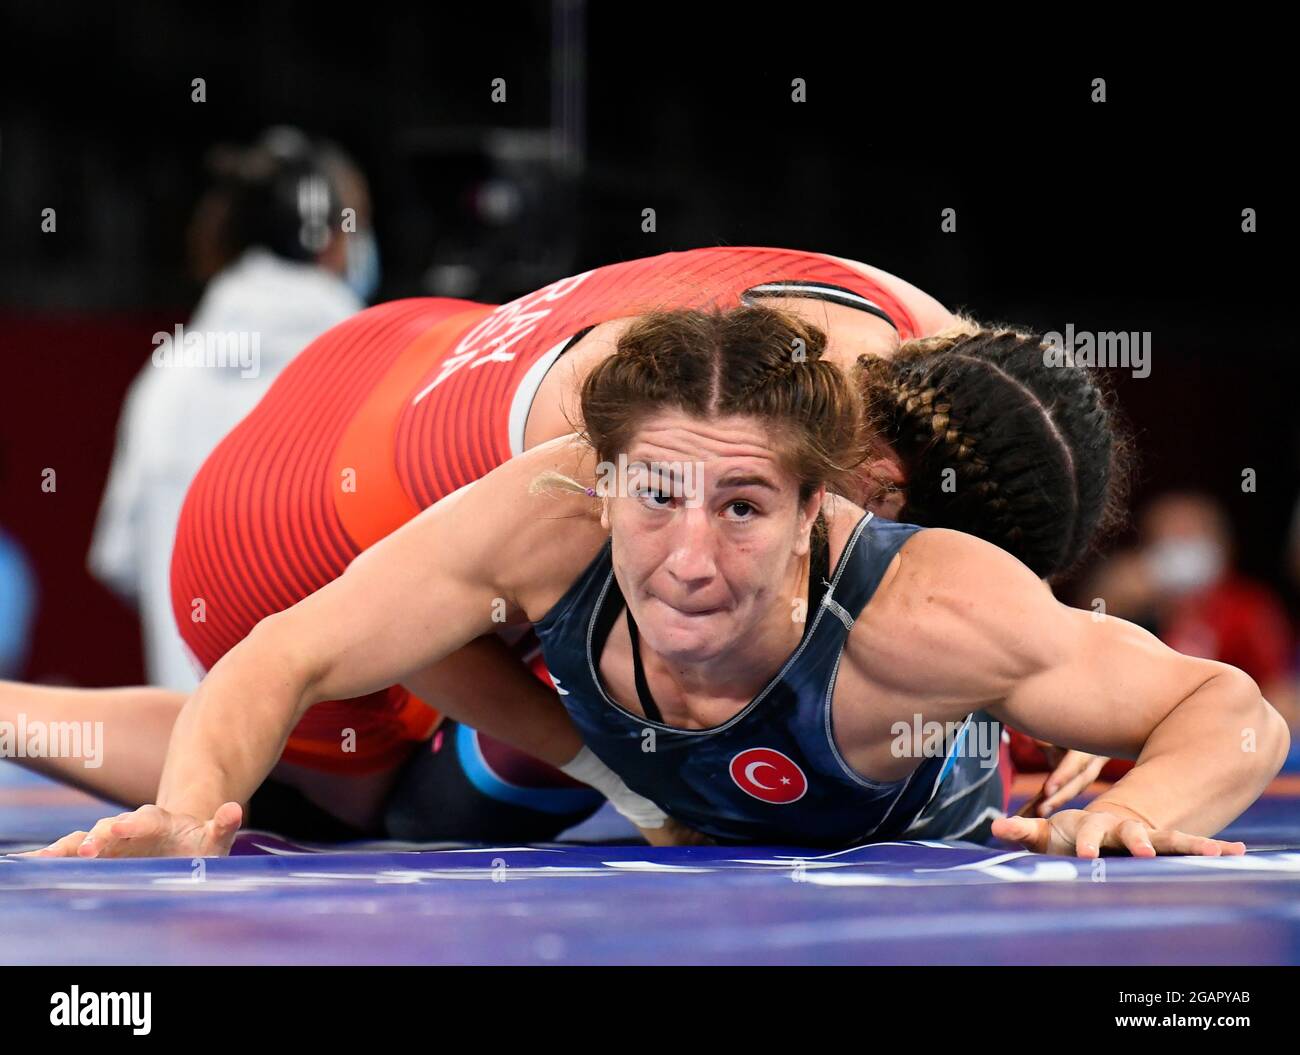 tokyo 2020 olympics wrestling freestyle women s 76kg quarterfinal makuhari messe hall a chiba japan august 1 2021 adeline maria gray of the united states in action